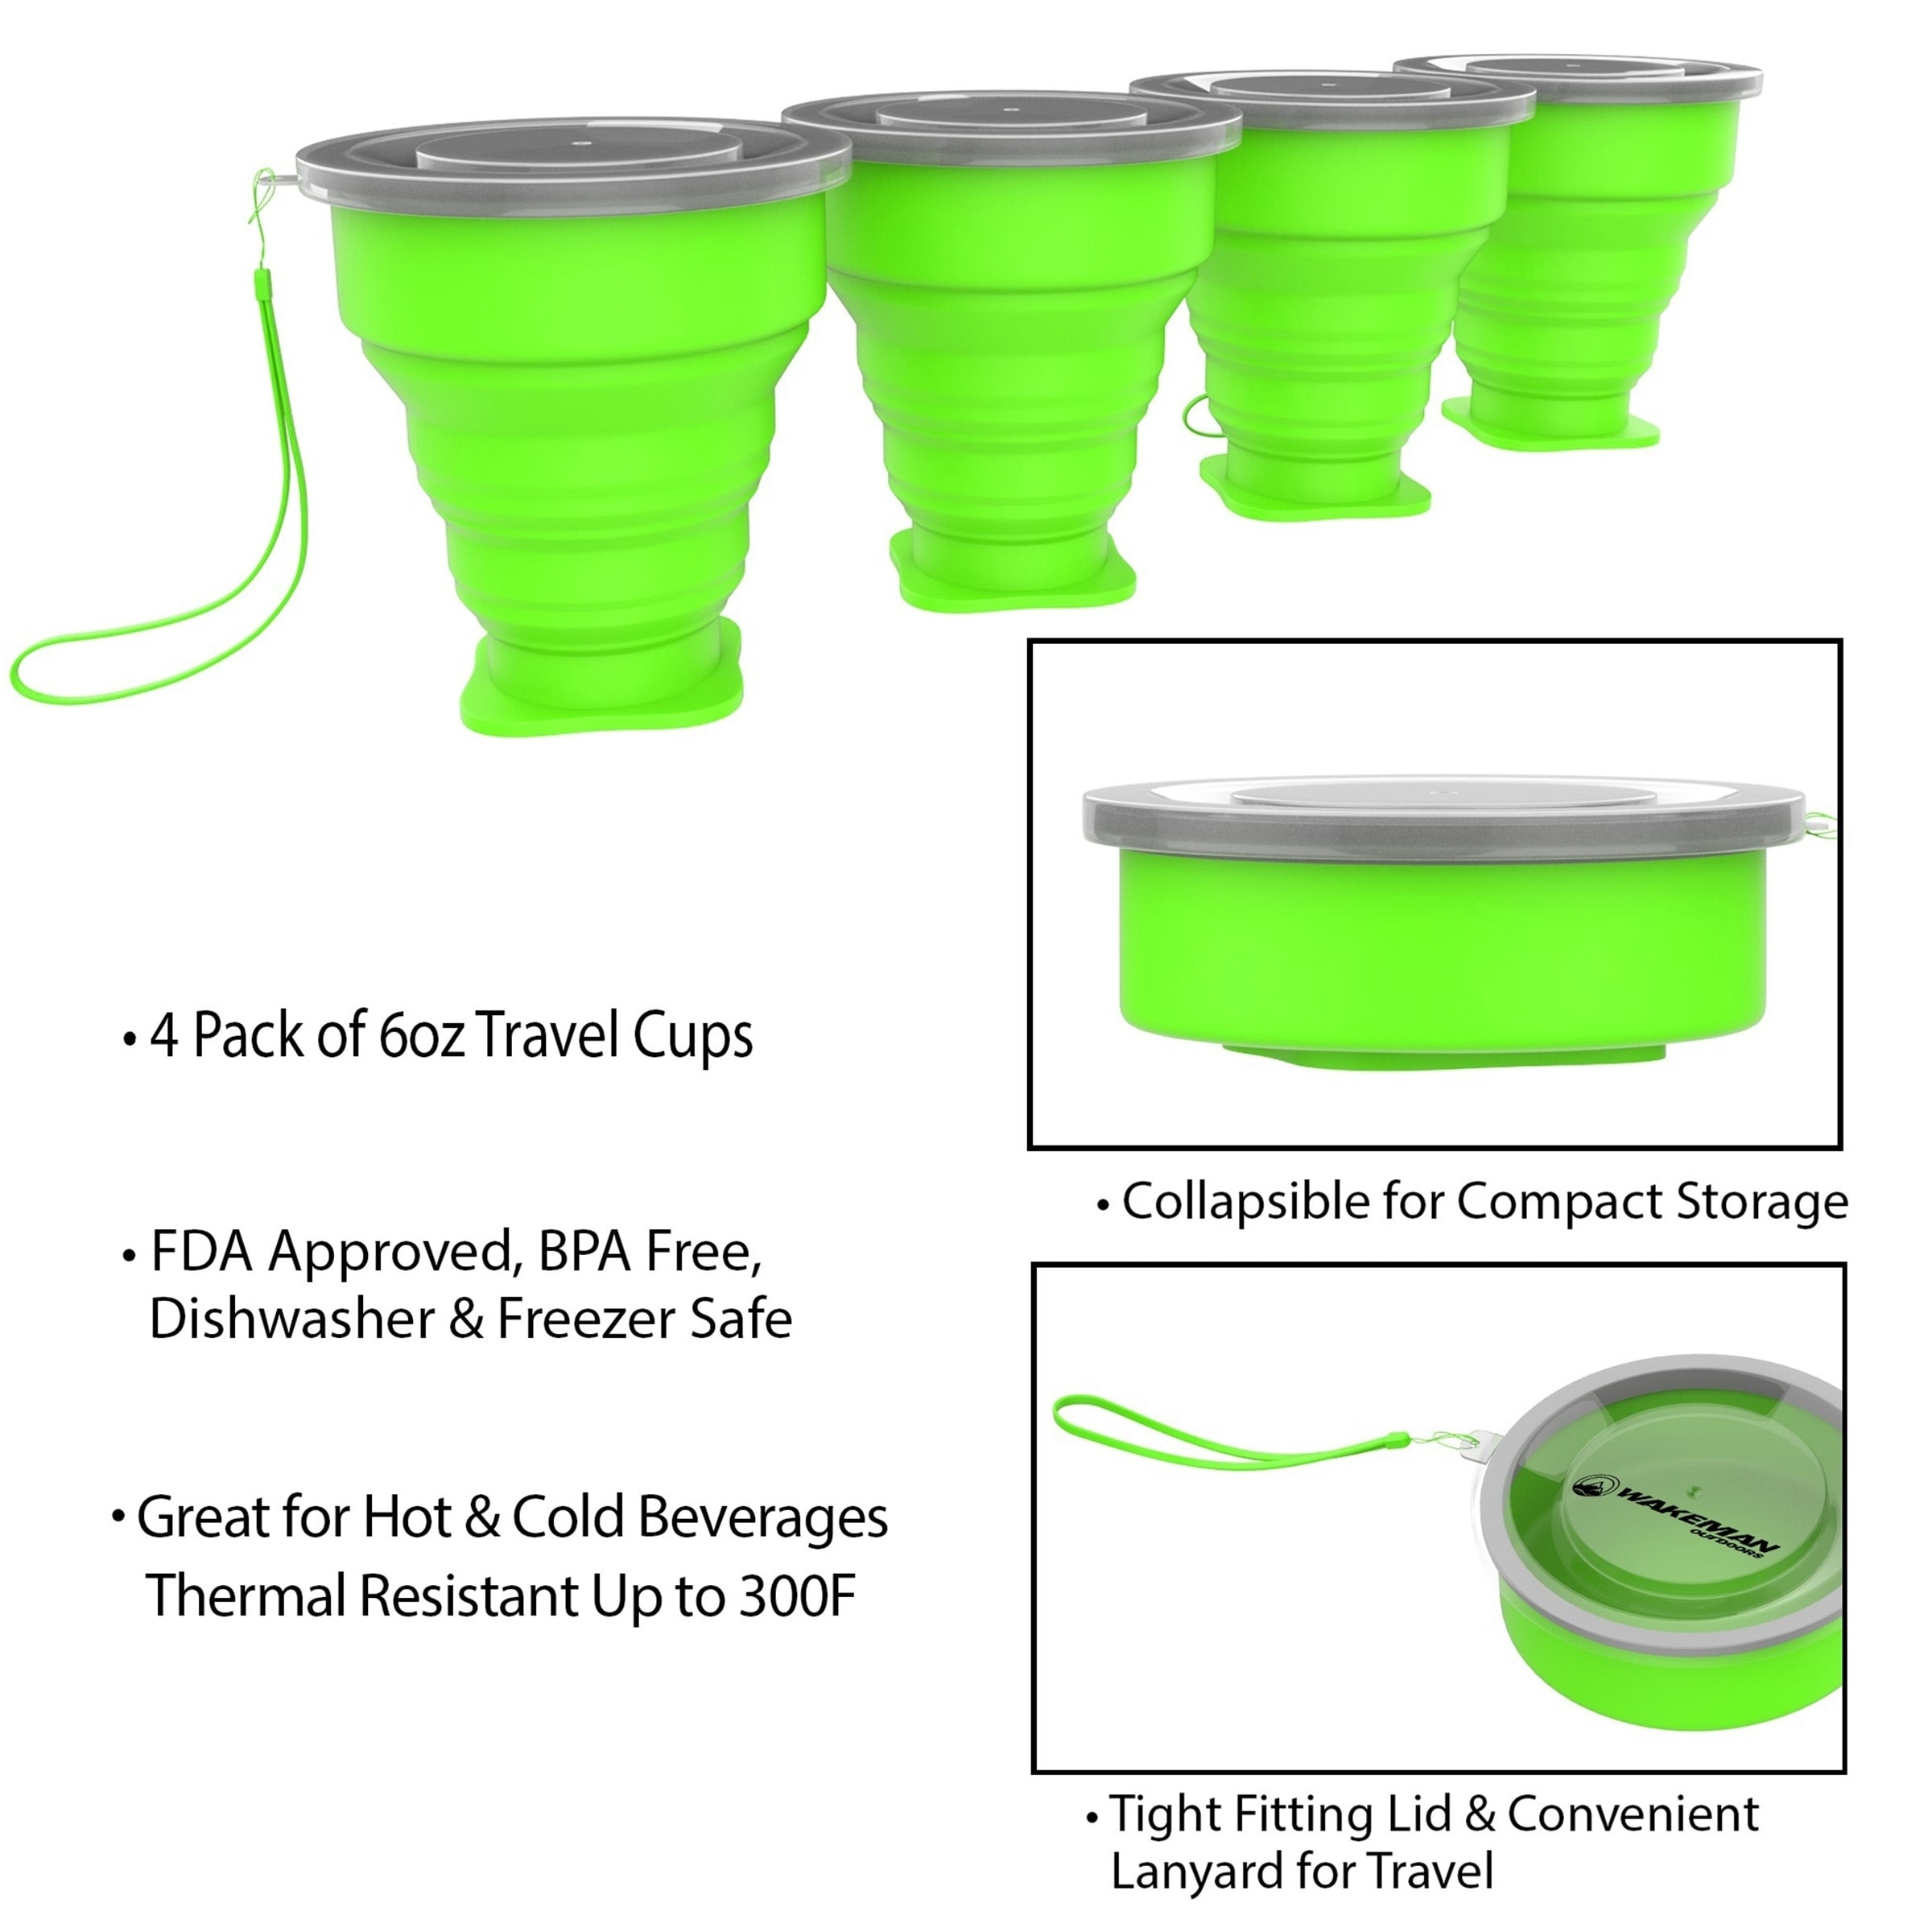 Collapsible Bowls with Lids BPA Free Silicone by Wakeman Outdoors